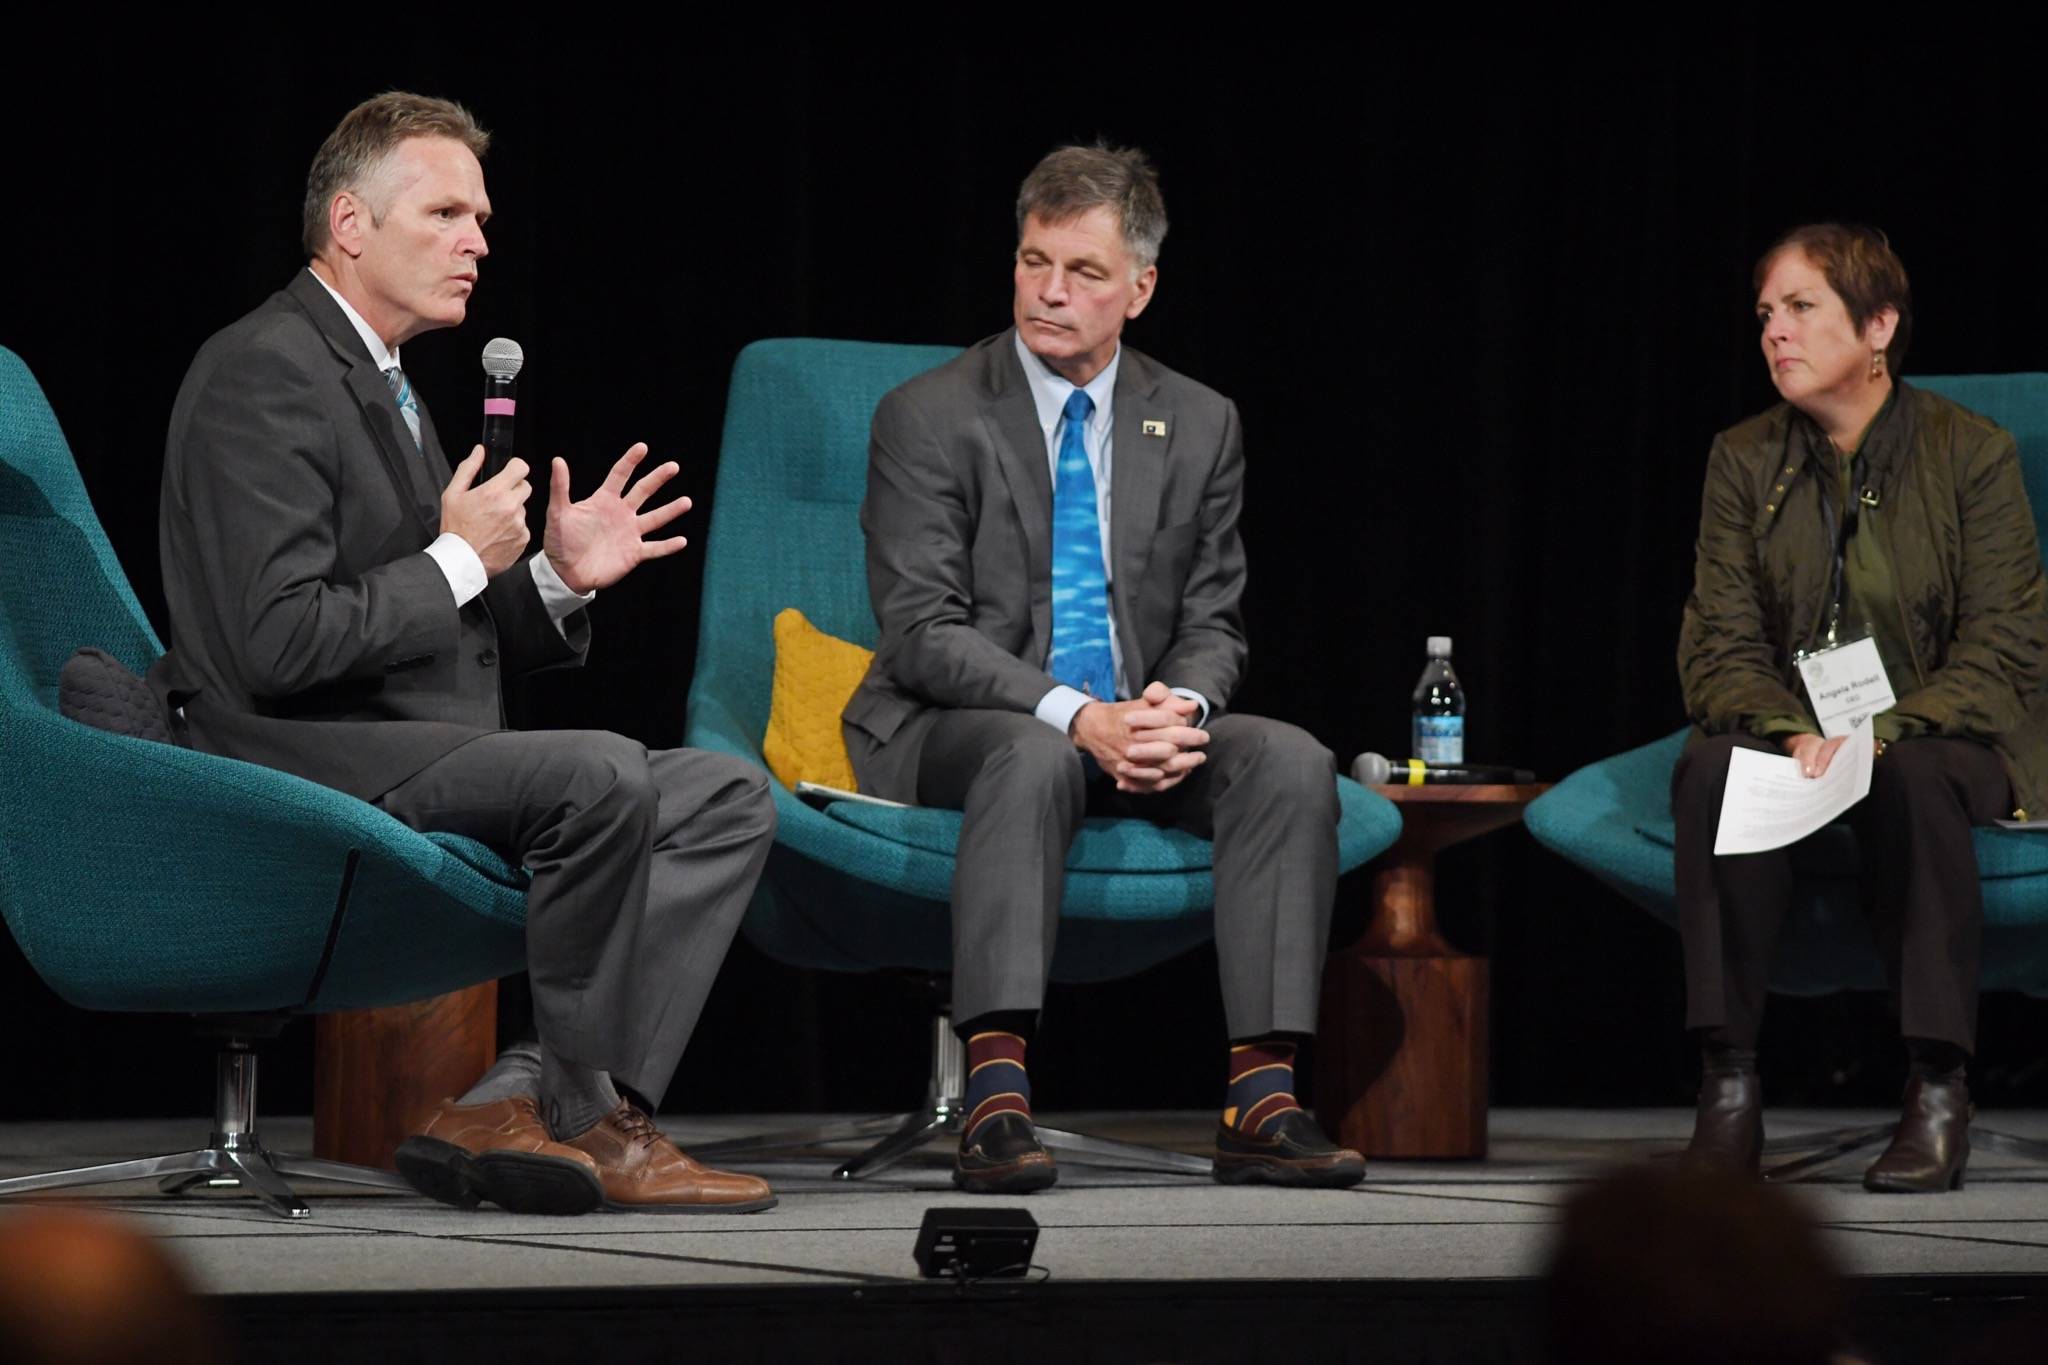 Alaska Gov. Mike Dunleavy, left, speaks with Wyoming Gov. Mark Gordon and Alaska Permanent Fund Corporation CEO Angela Rodell during the annual meeting of the International Forum of Sovereign Wealth Funds at Centennial Hall on Thursday, Sept. 12, 2019. (Michael Penn| Juneau Empire)